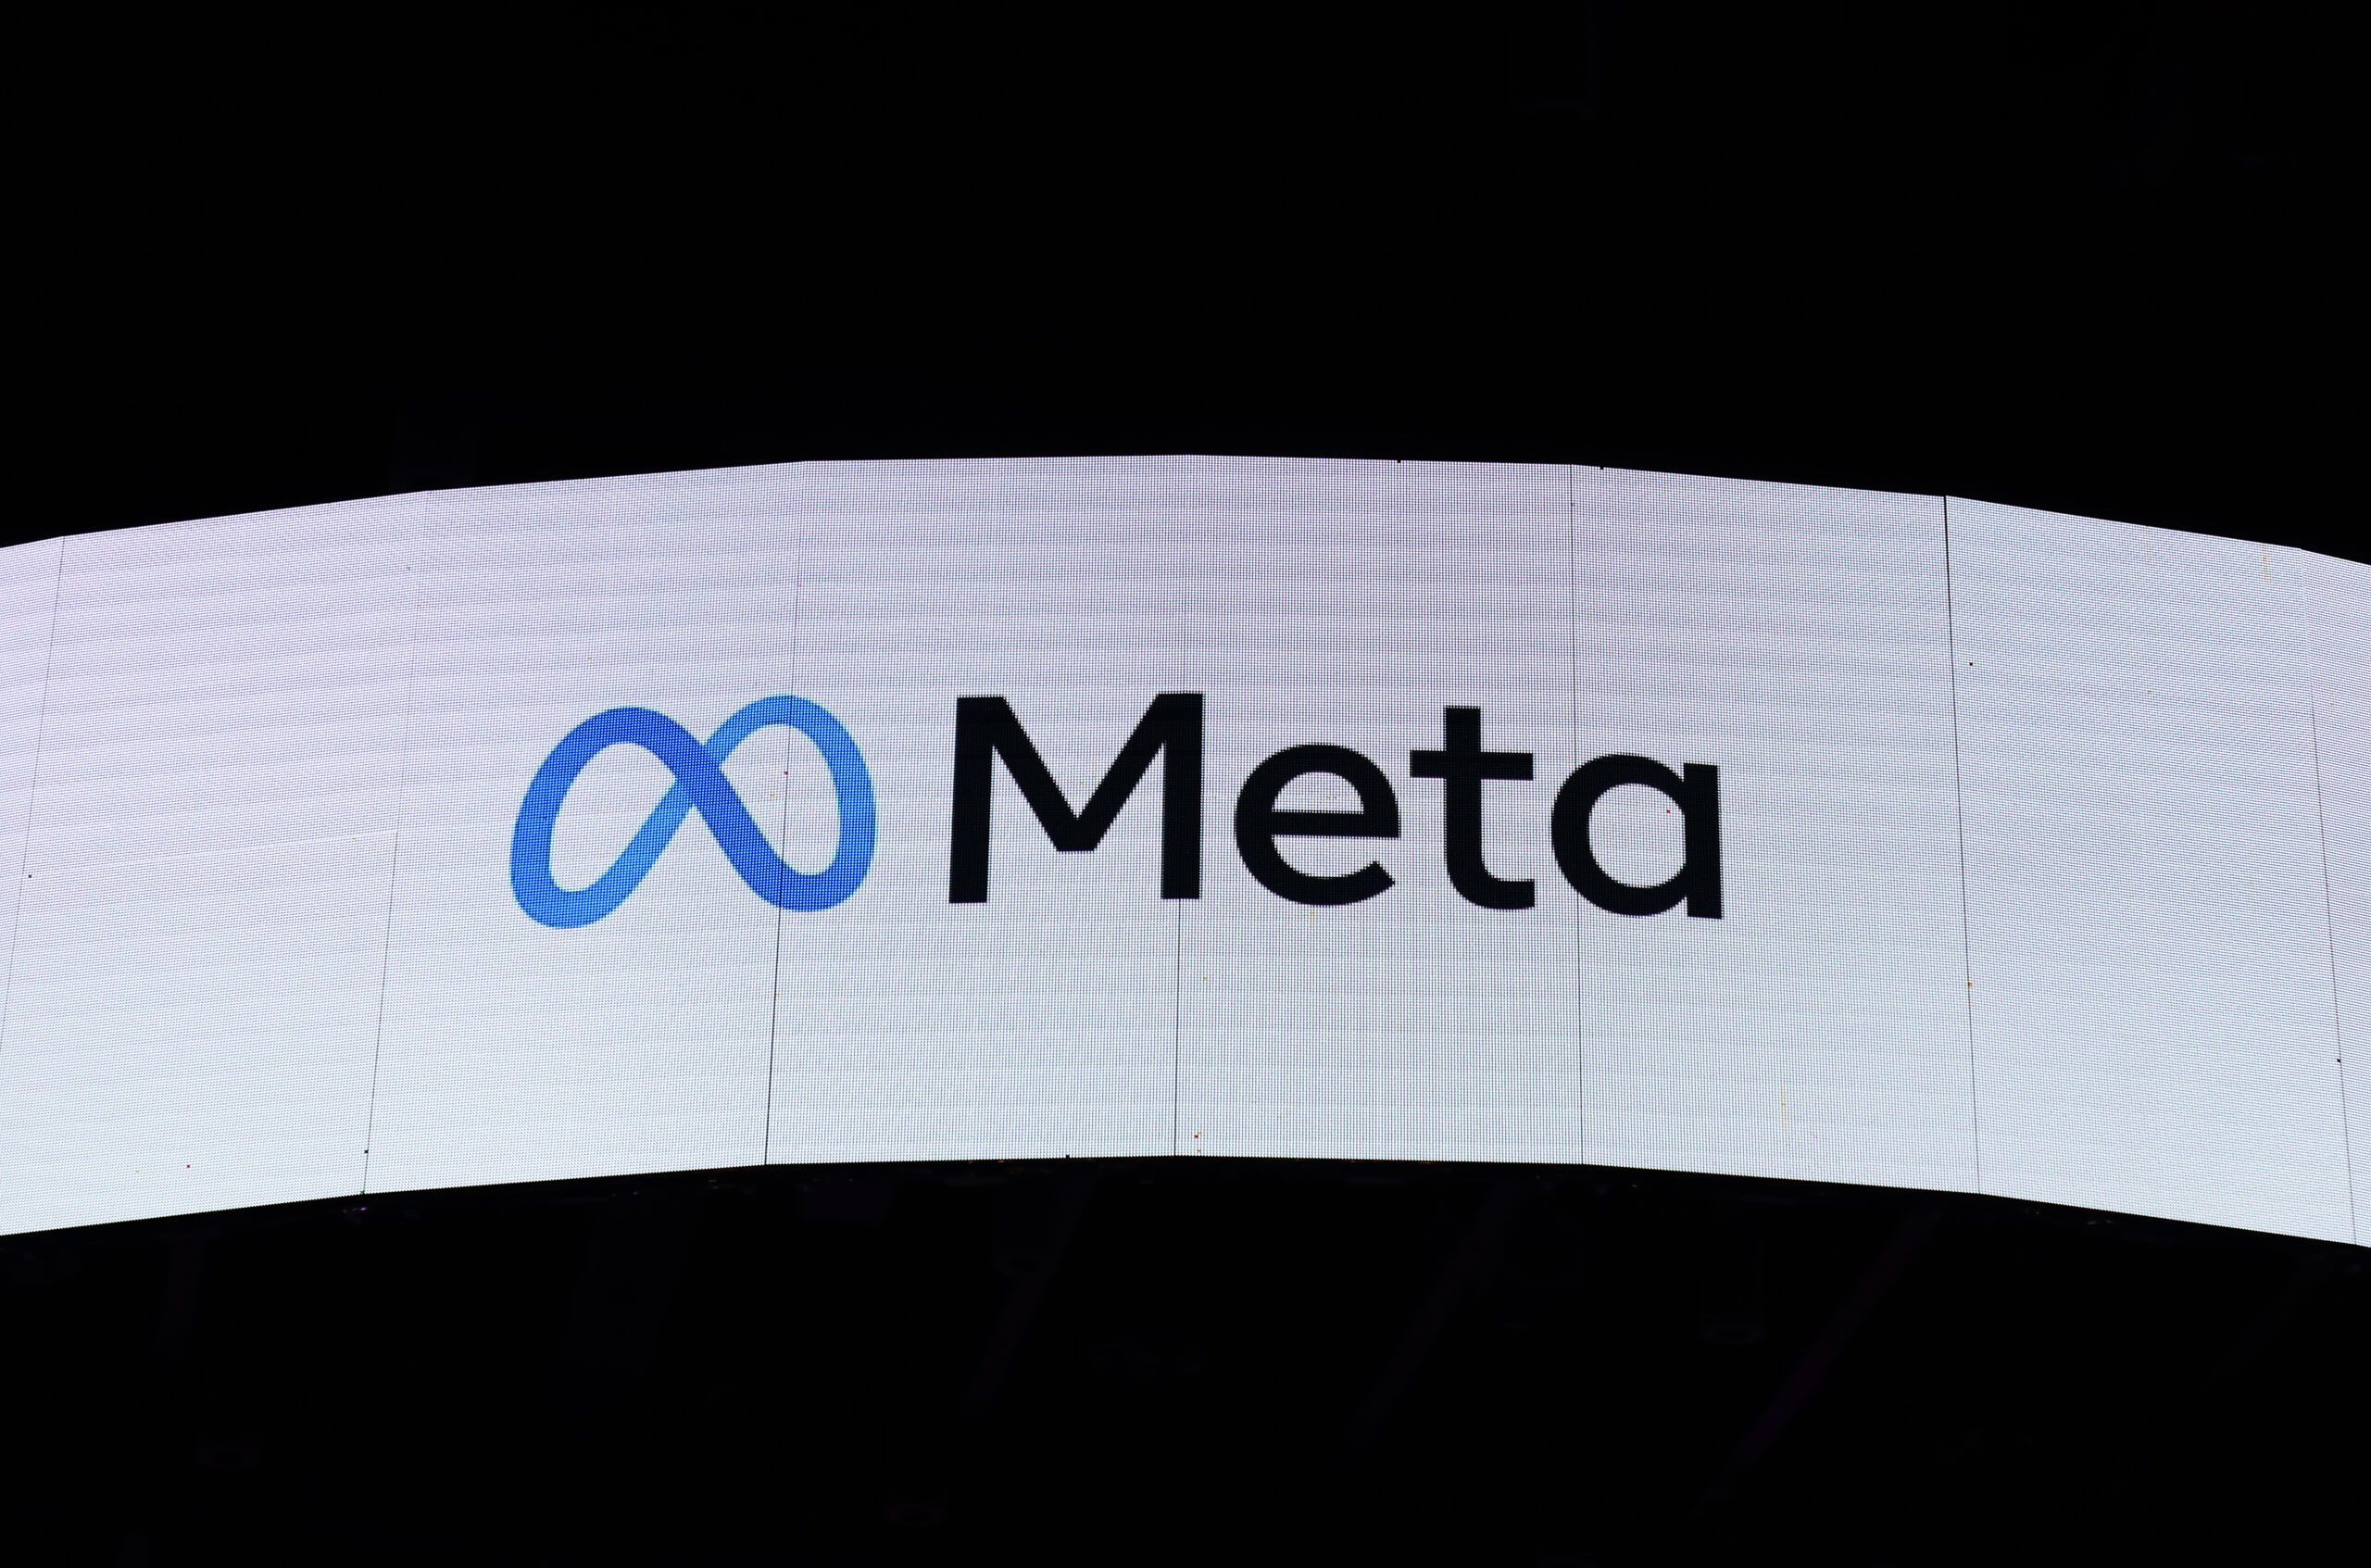 Meta Knowingly Designed Its Platforms to Hook Kids, Reports Say – The TechLead